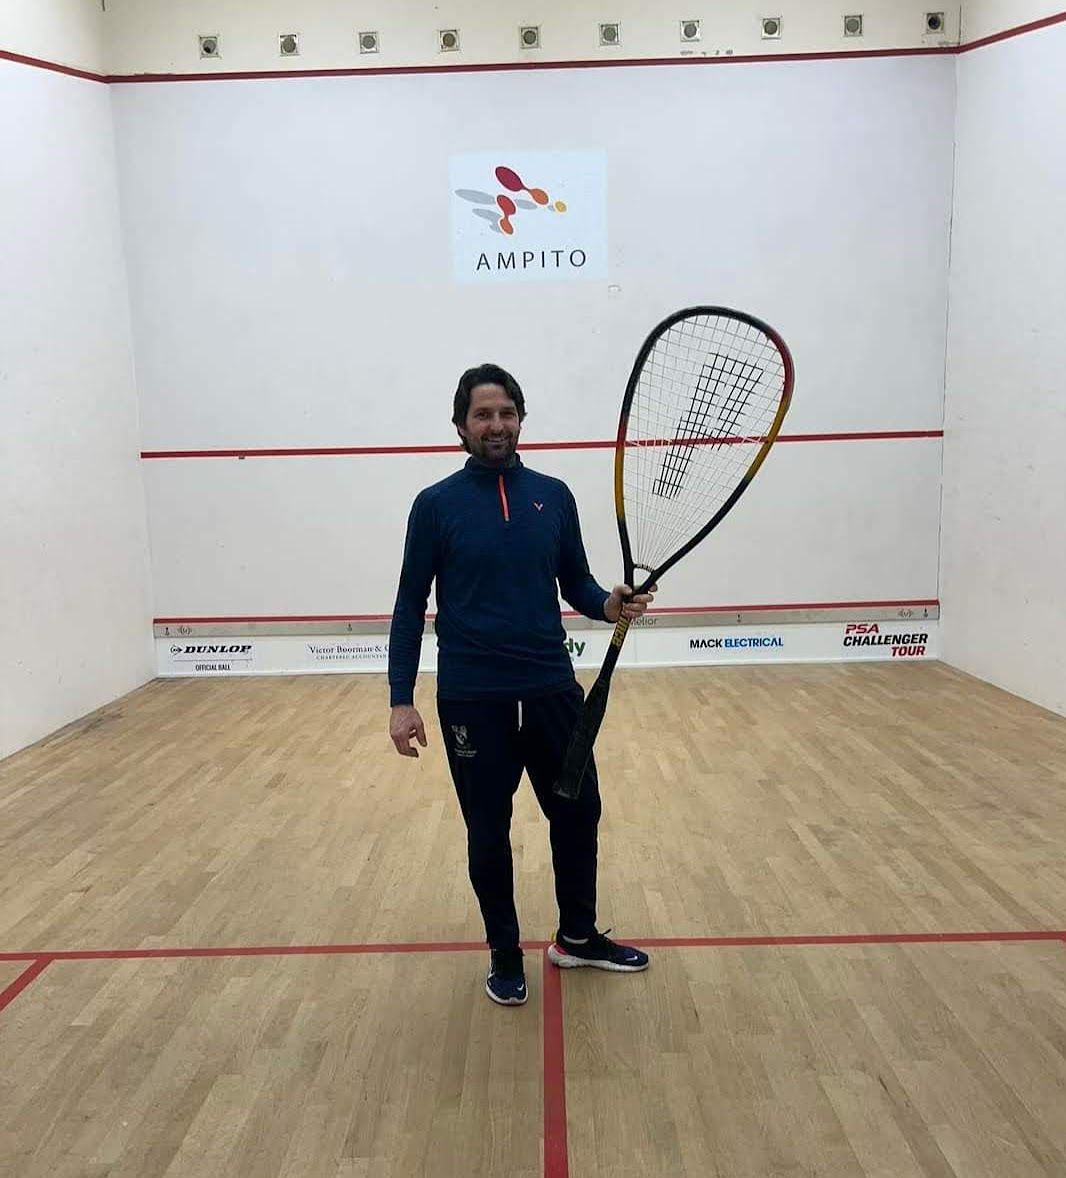 a beginners guide to squash and a player with an extra large racket